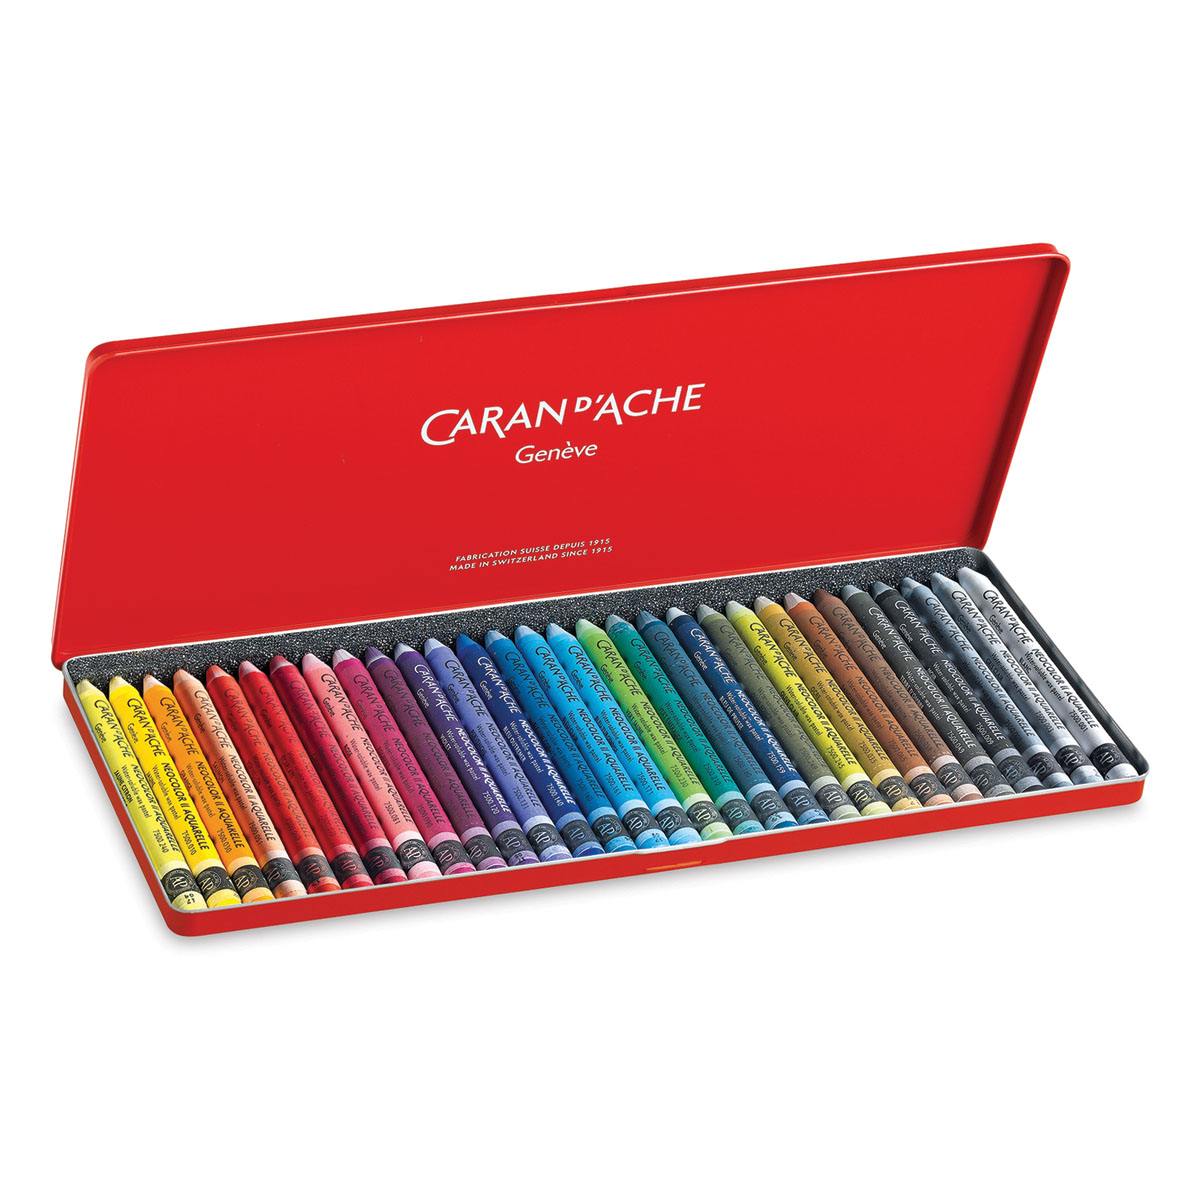 Caran d'Ache Neocolor II Pastels (Crayons) 84 Set Review! Swatching and  Large Artwork 